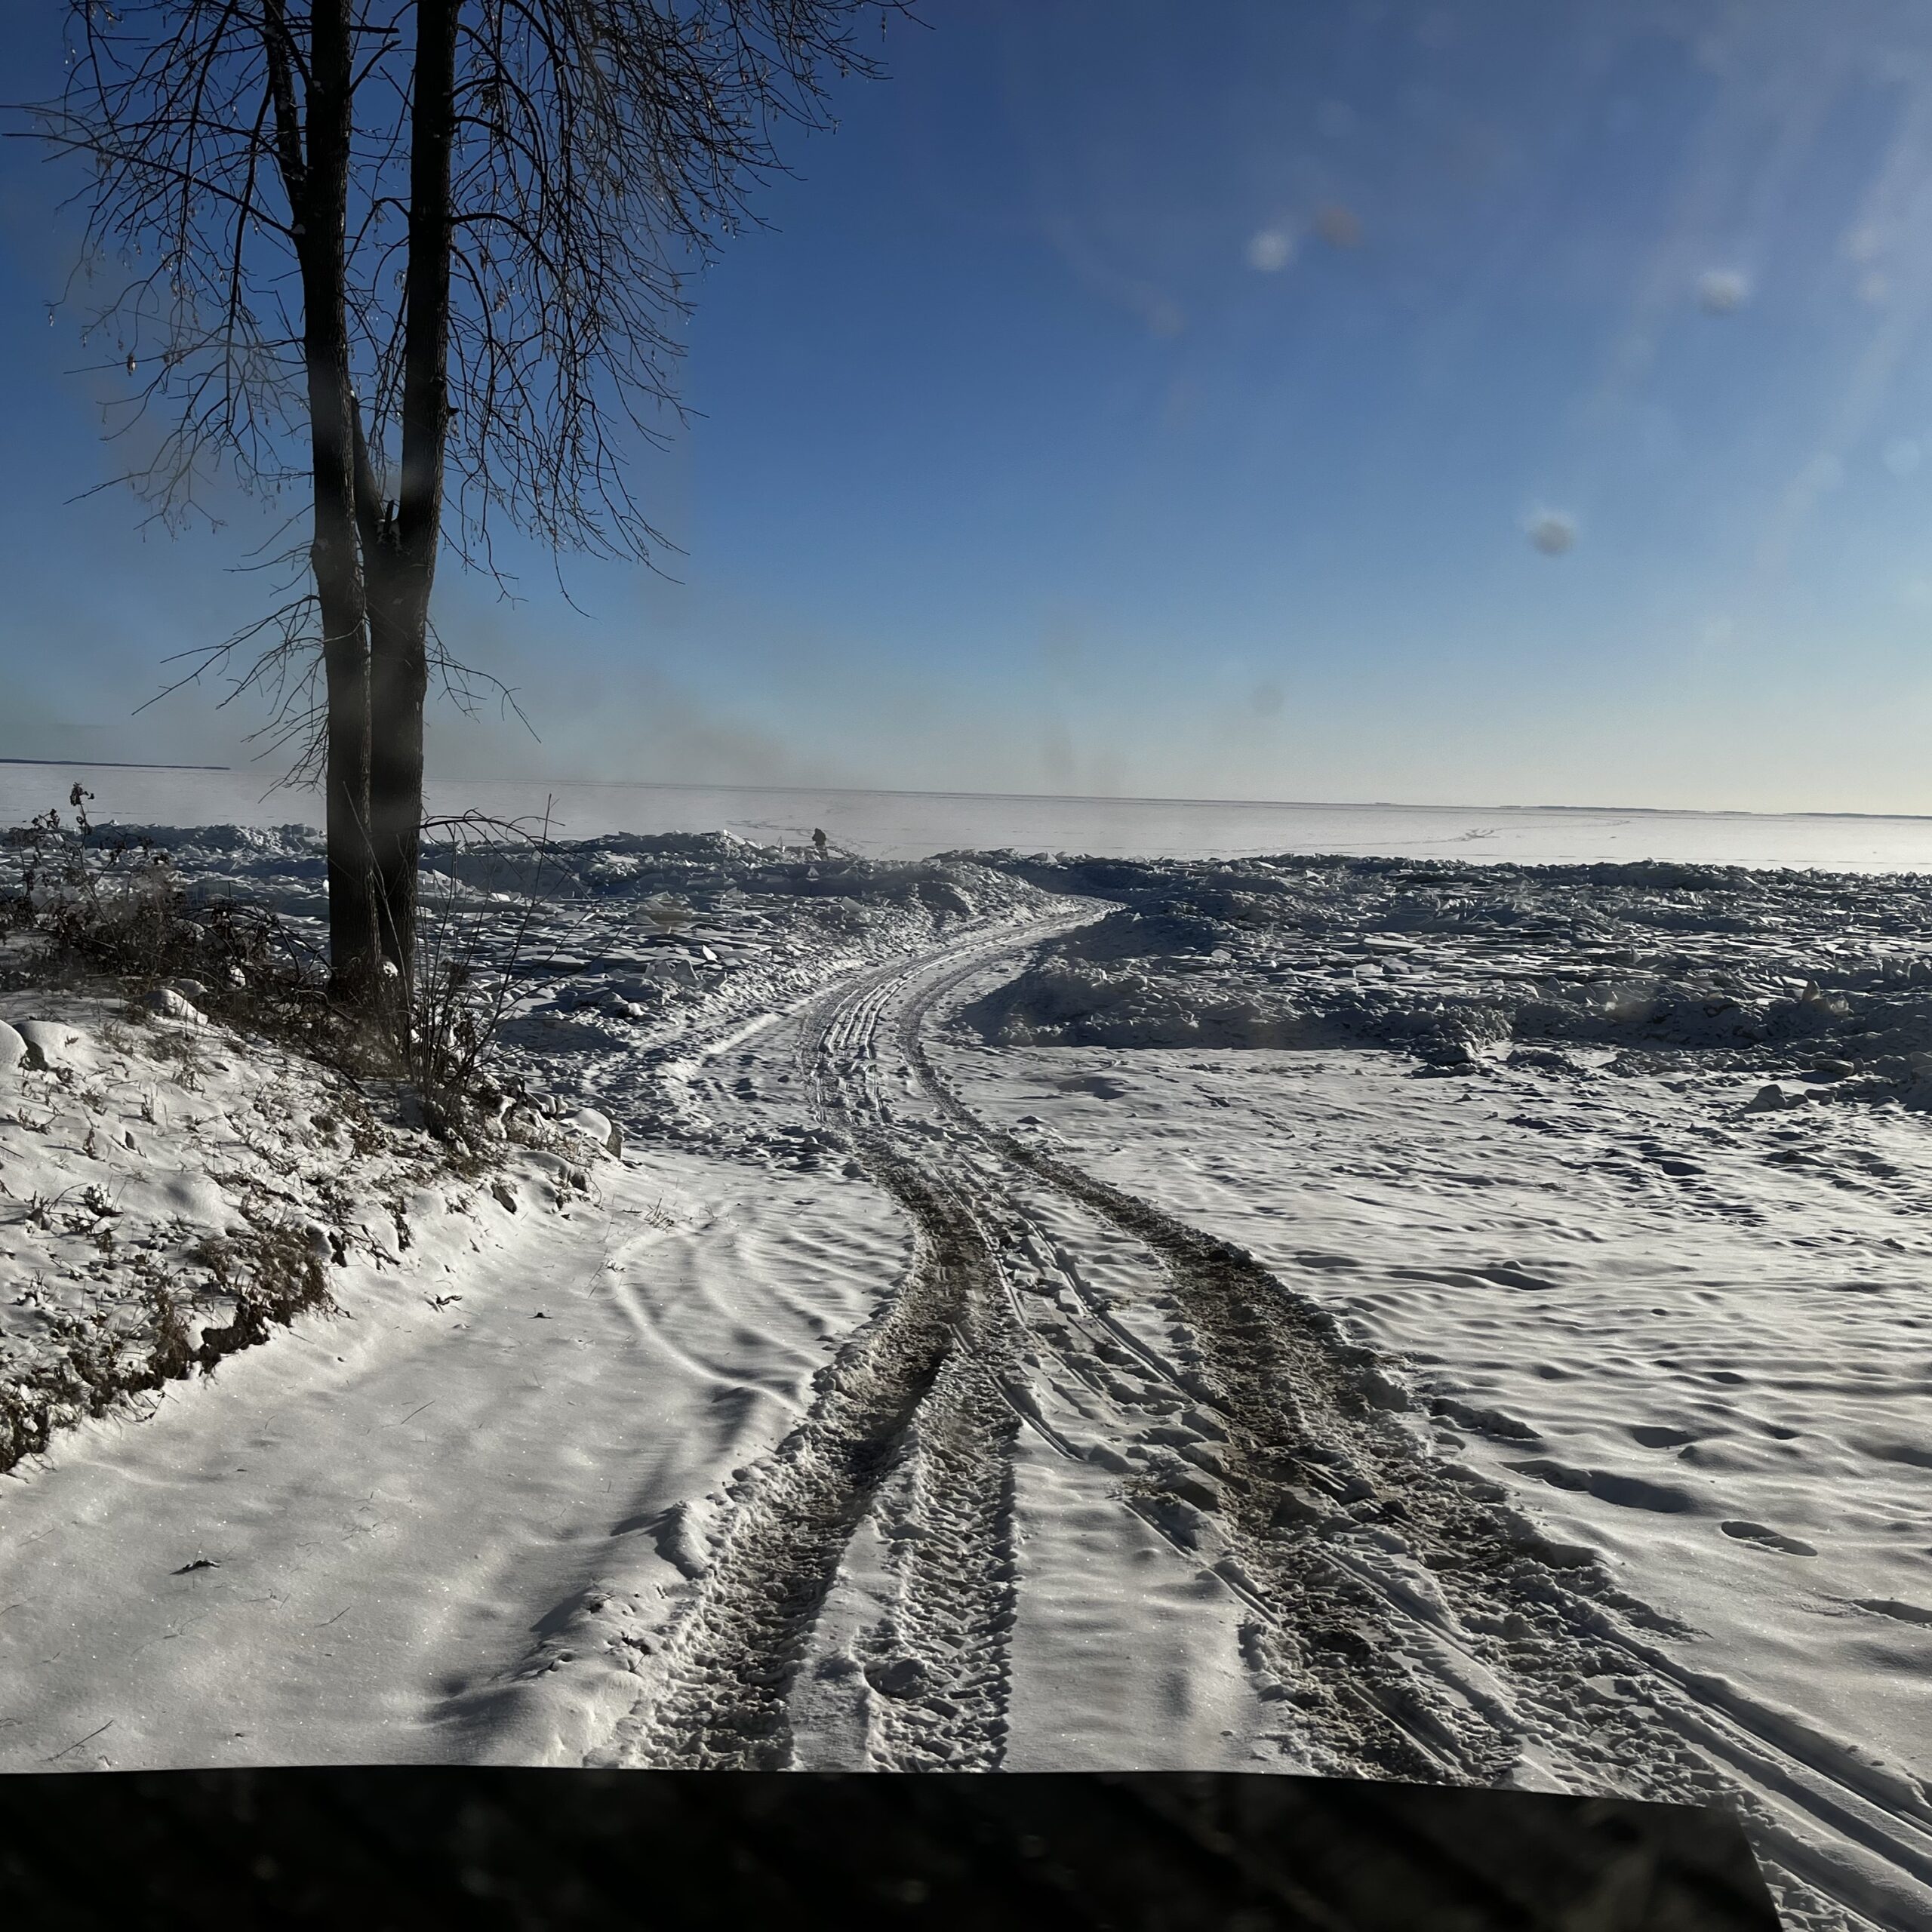 Ready for hard water fishing on Mille Lacs Lake